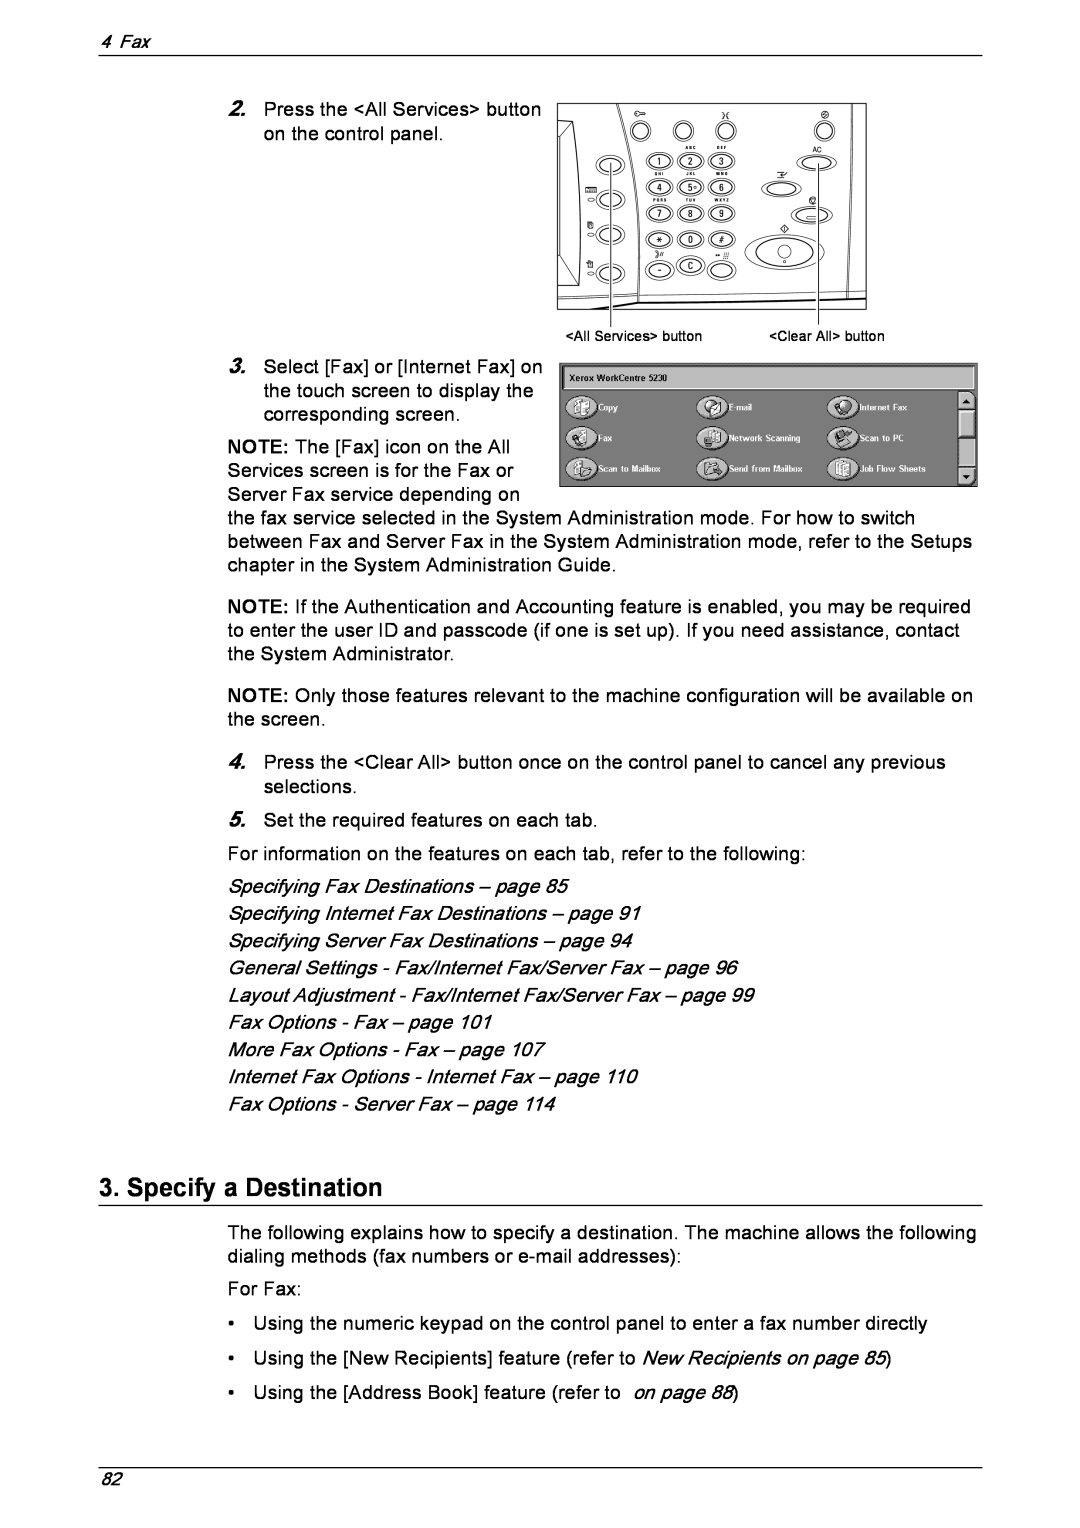 Xerox 5230 manual Specify a Destination, Specifying Fax Destinations – page, Specifying Internet Fax Destinations – page 